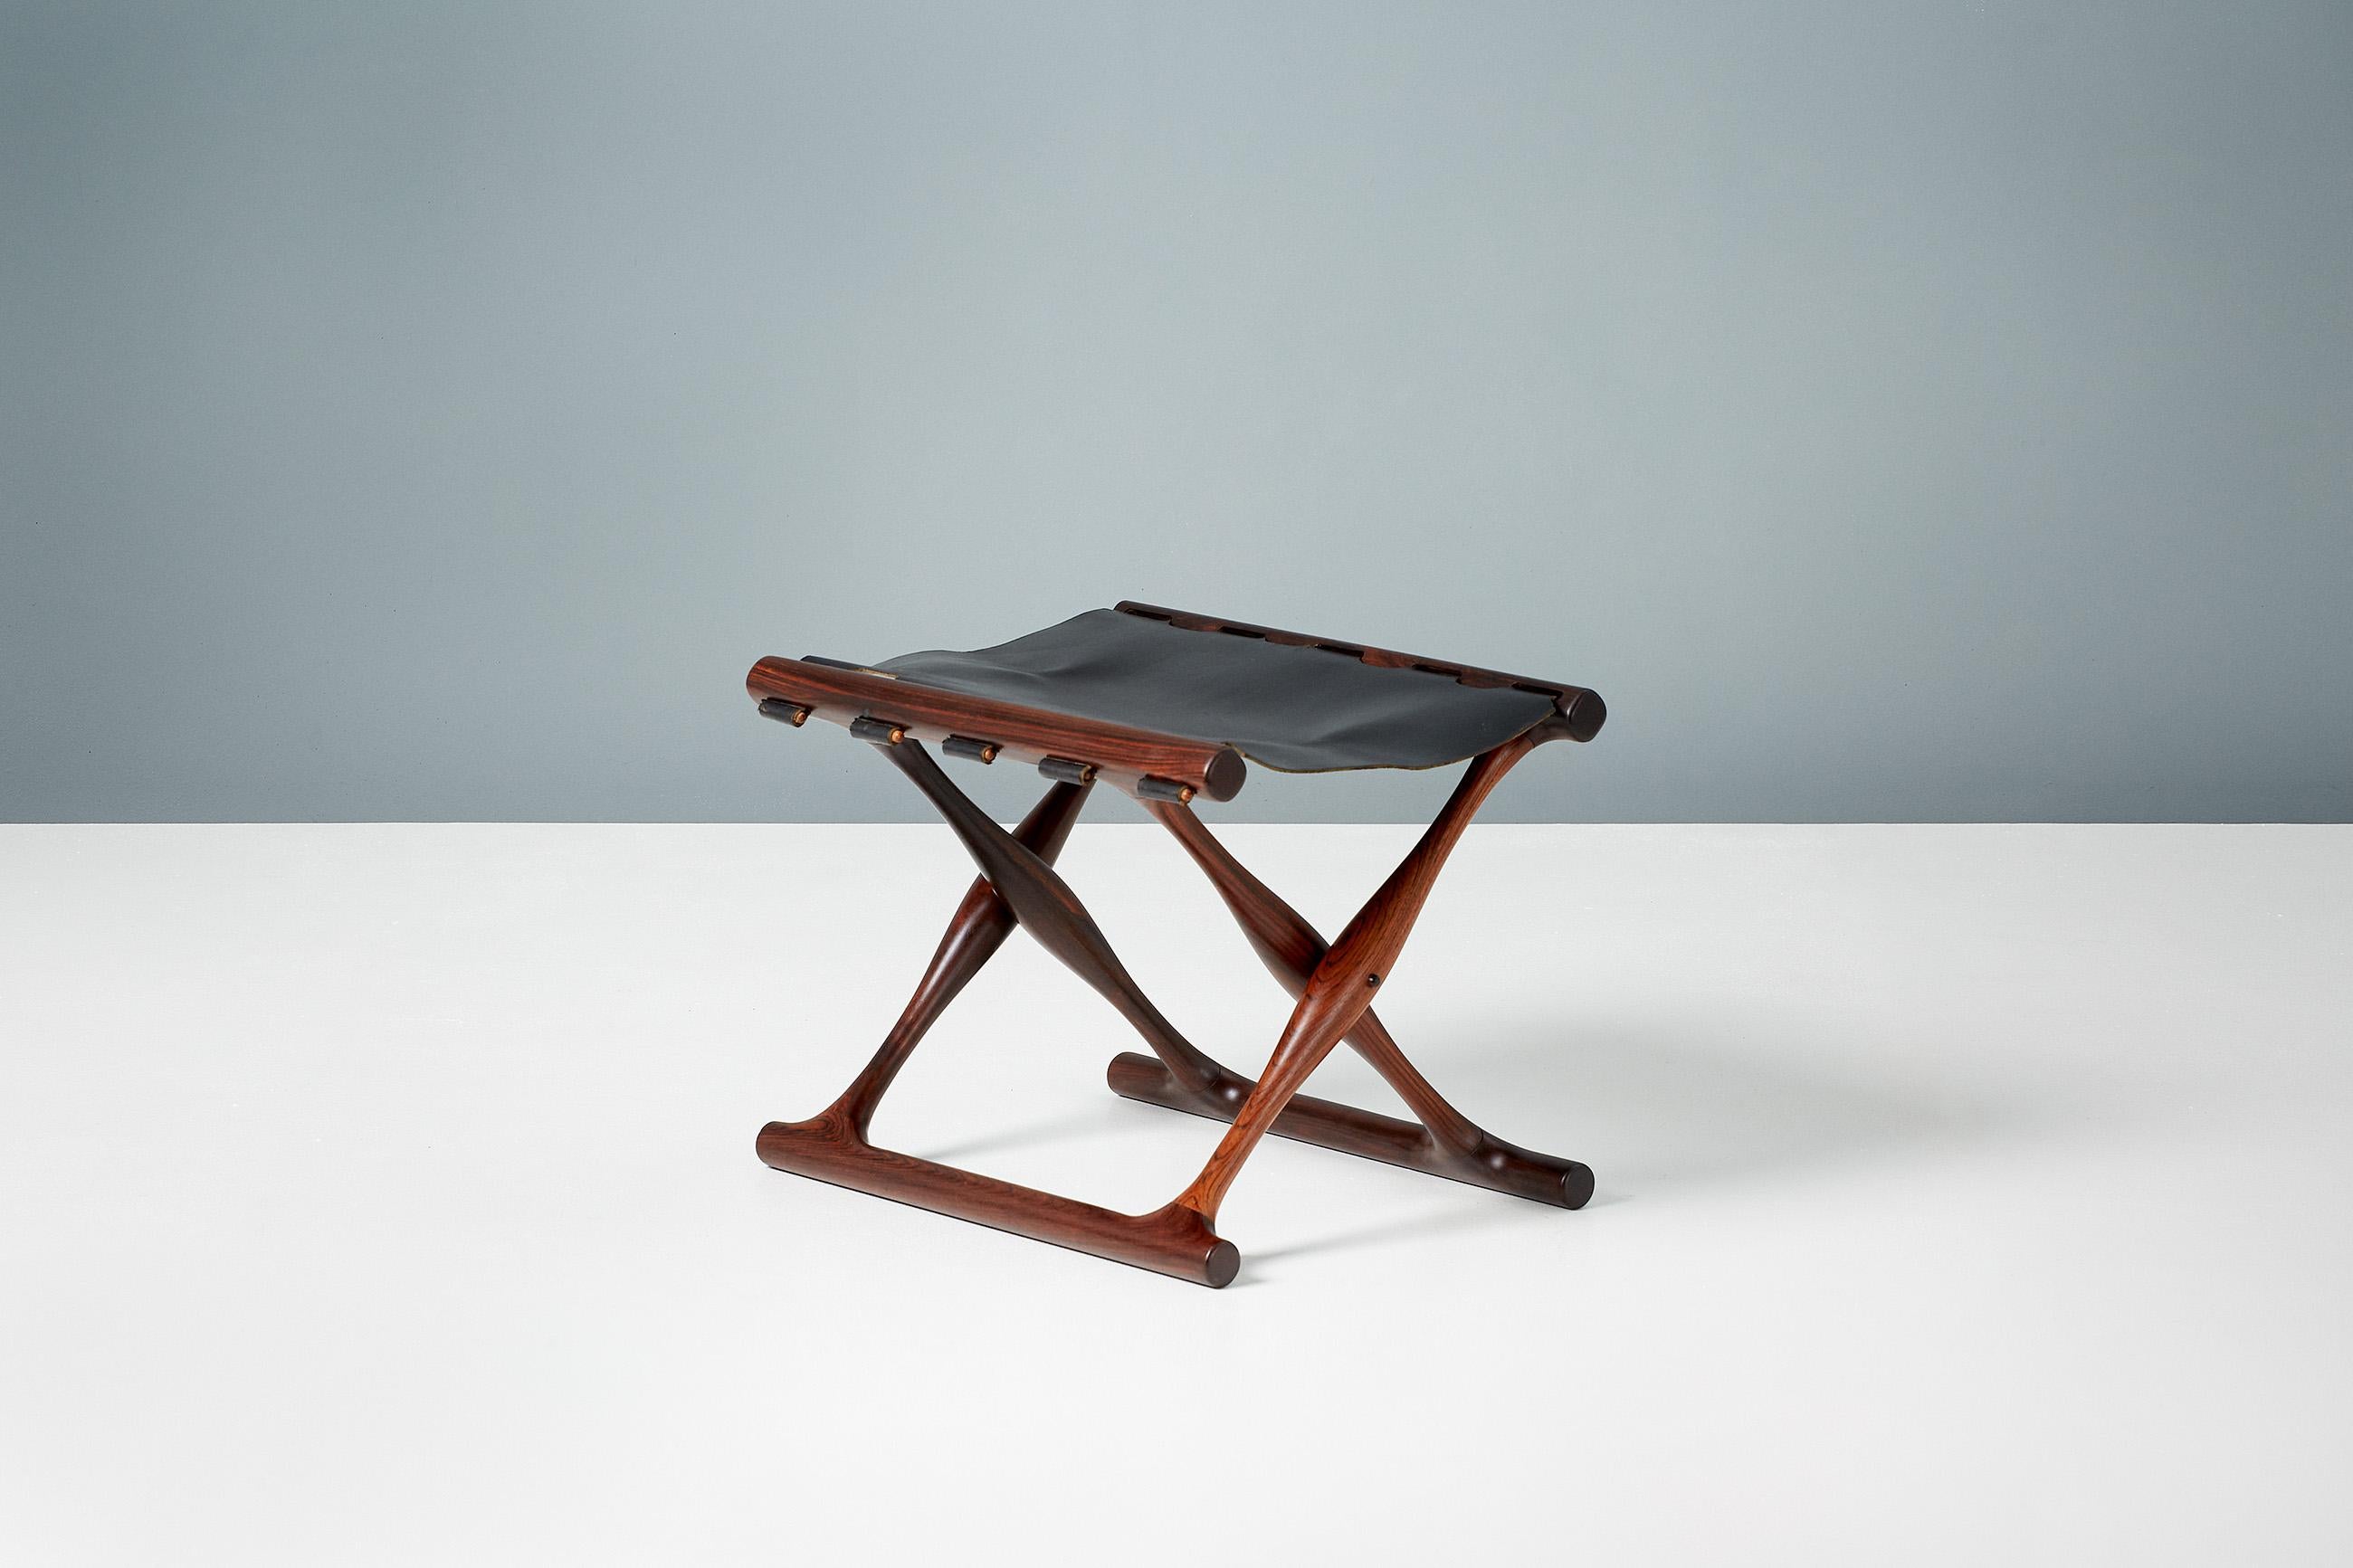 Poul Hundevad

Guldhoj folding stool, 1948

Rarely seen pair of Model 41 folding stools in Brazilian rosewood with black saddle leather seats. The Guldhoj stool was designed as a replica of a Bronze Age artefact found in Vamdrup, Denmark that